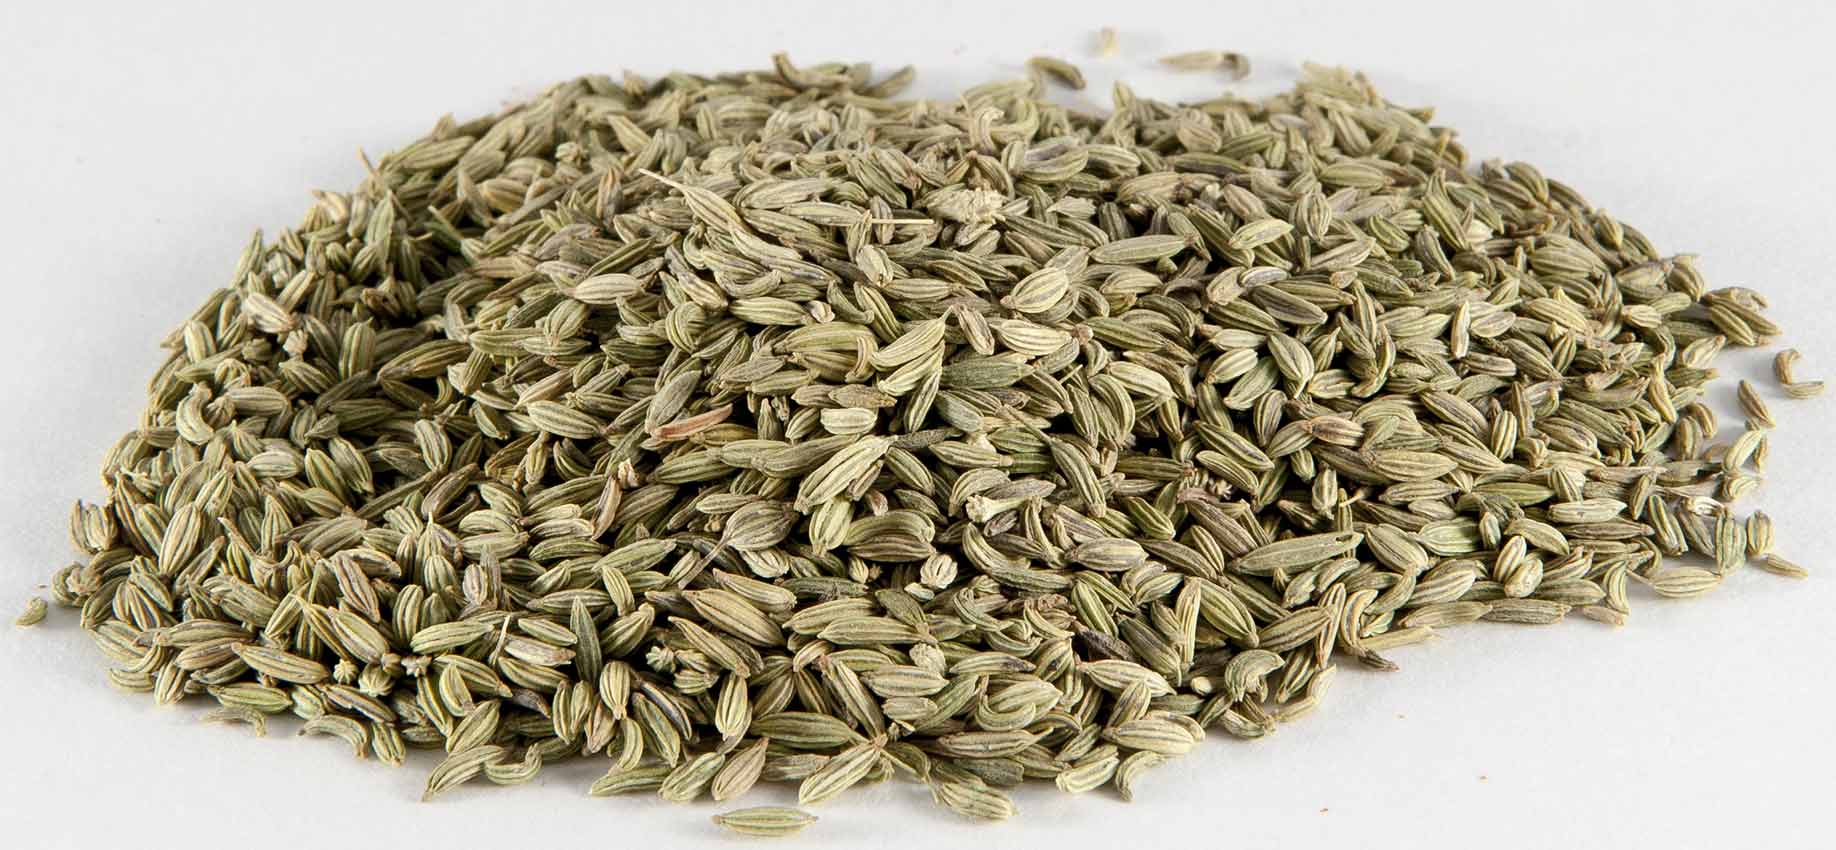 fennel seeds for bad breath halitosis how to get rid of naturally